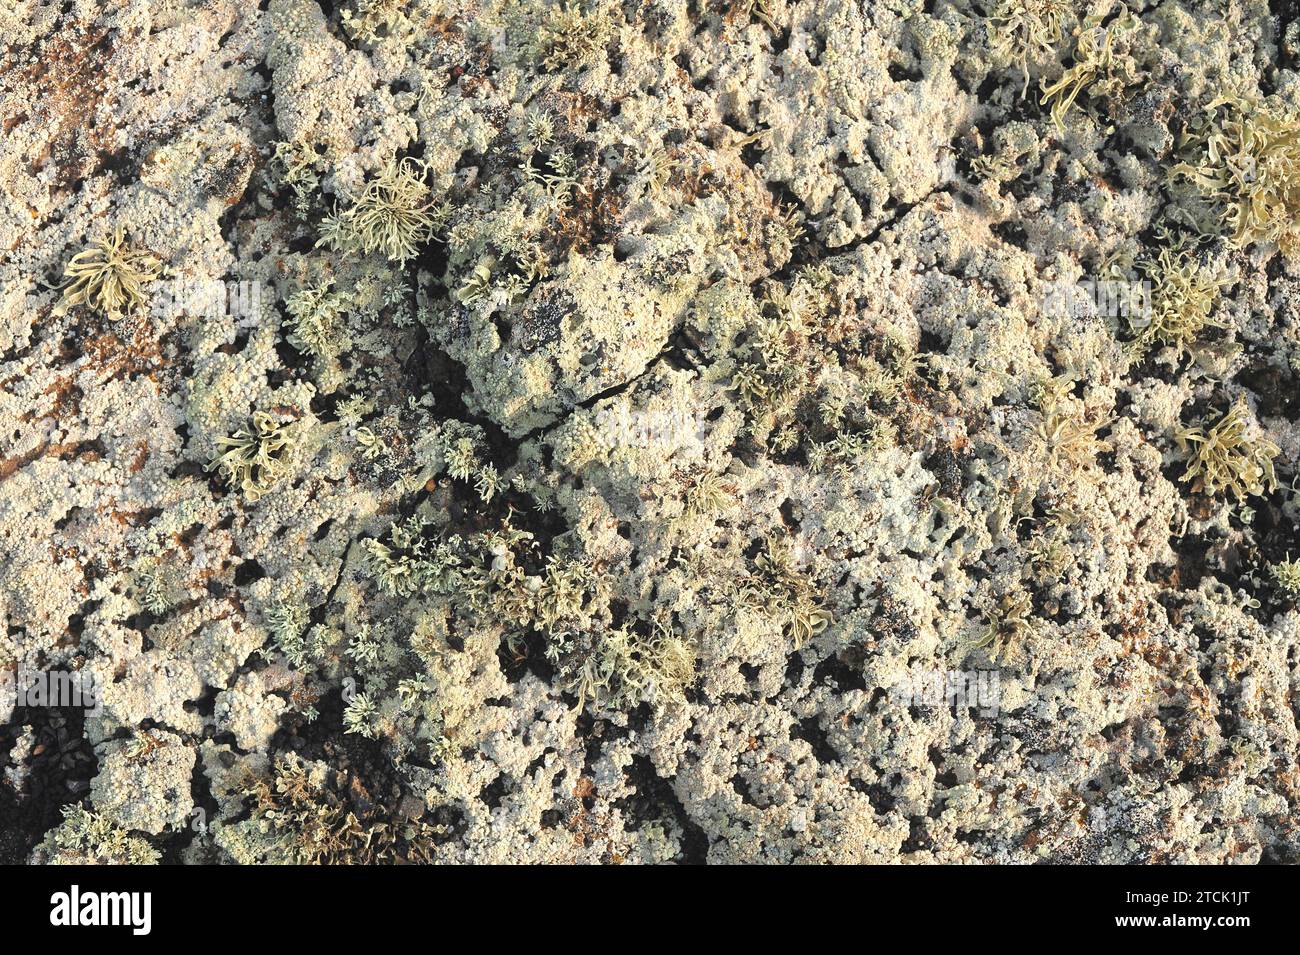 Lichen community dominated by Pertusaria rupicola (crustose) and Ramalina canariensis (fruticulose) growing on a volcanic rock. This photo was taken i Stock Photo